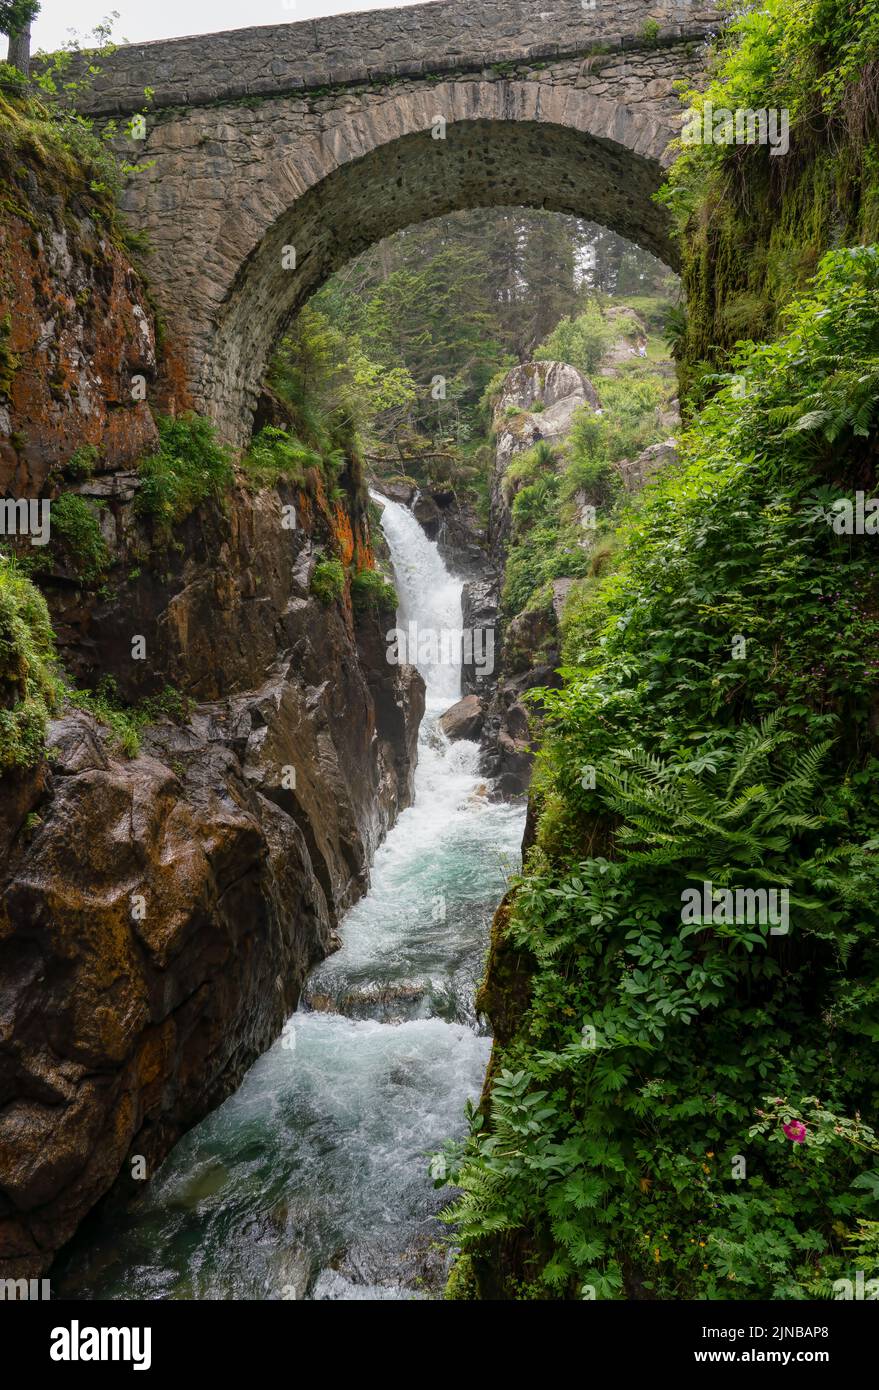 a waterfall and river pour through steep-sided rock gorge with white water crashing over boulders and stone bridge overhead, Pont e'Espagne Pyrennes Stock Photo